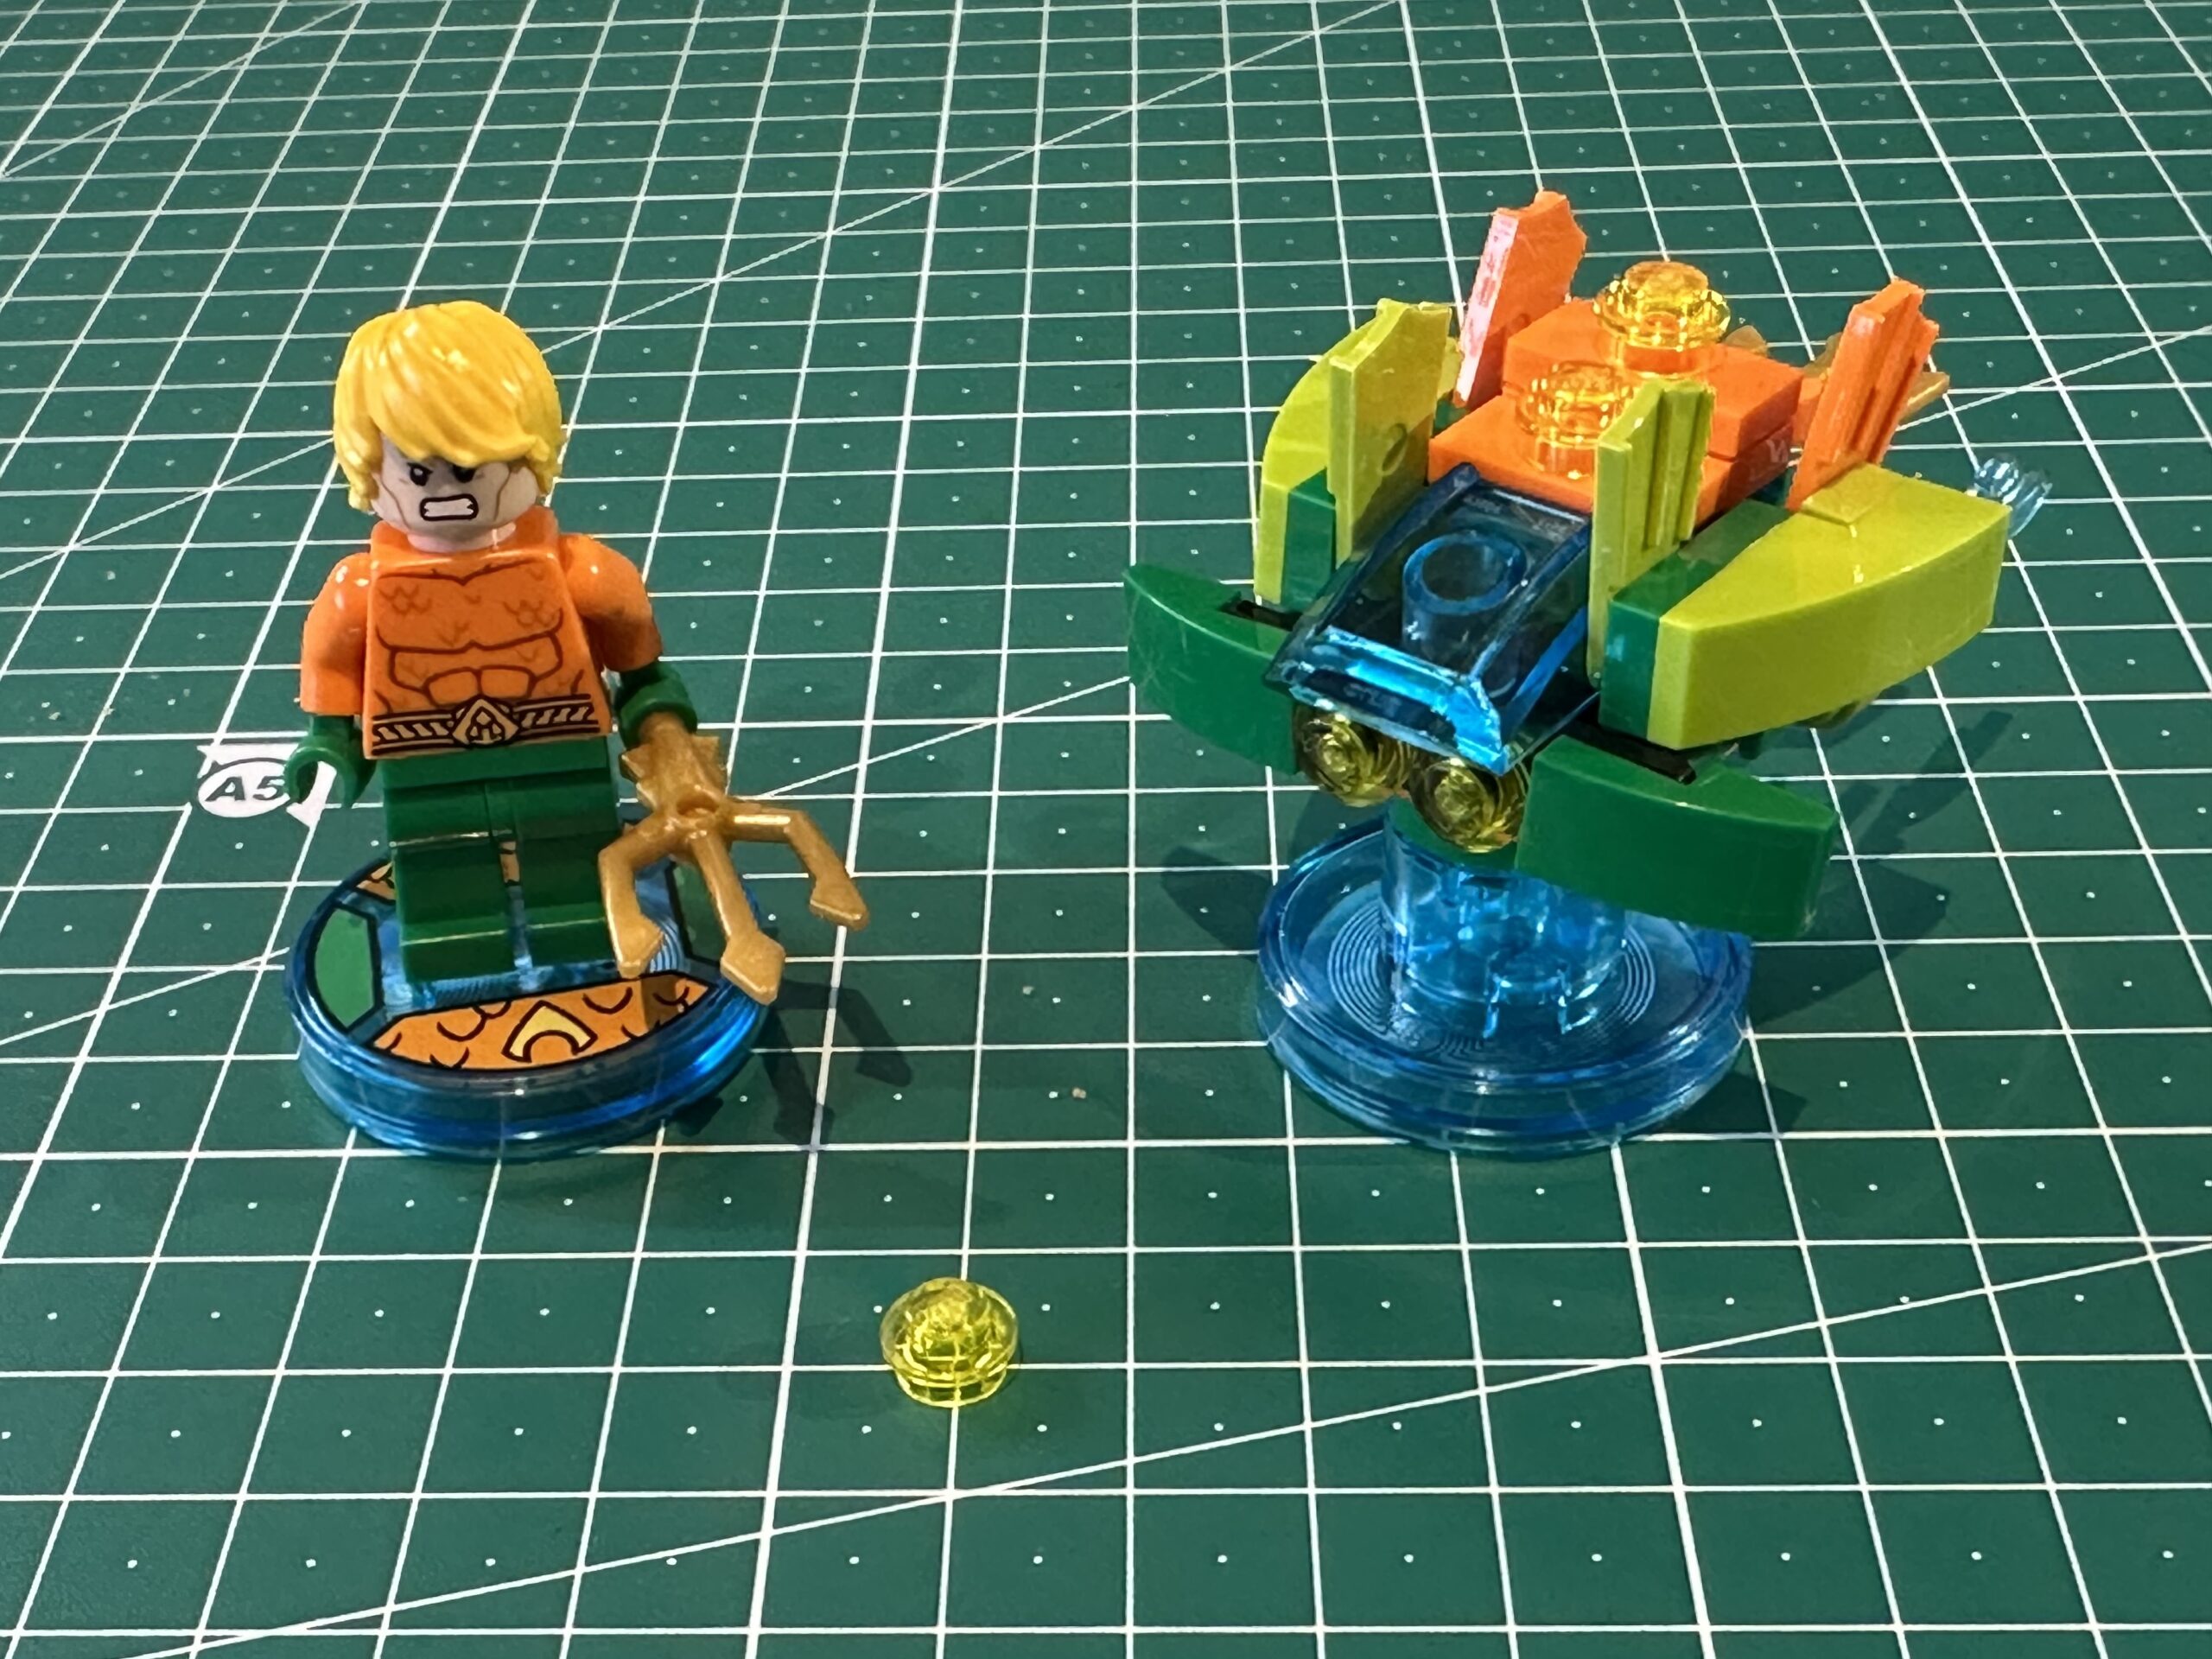 LEGO minifigure of Aquaman in his signature orange and green outfit holding a golden trident on the left and some weird orange and green underwater scooter on the right.